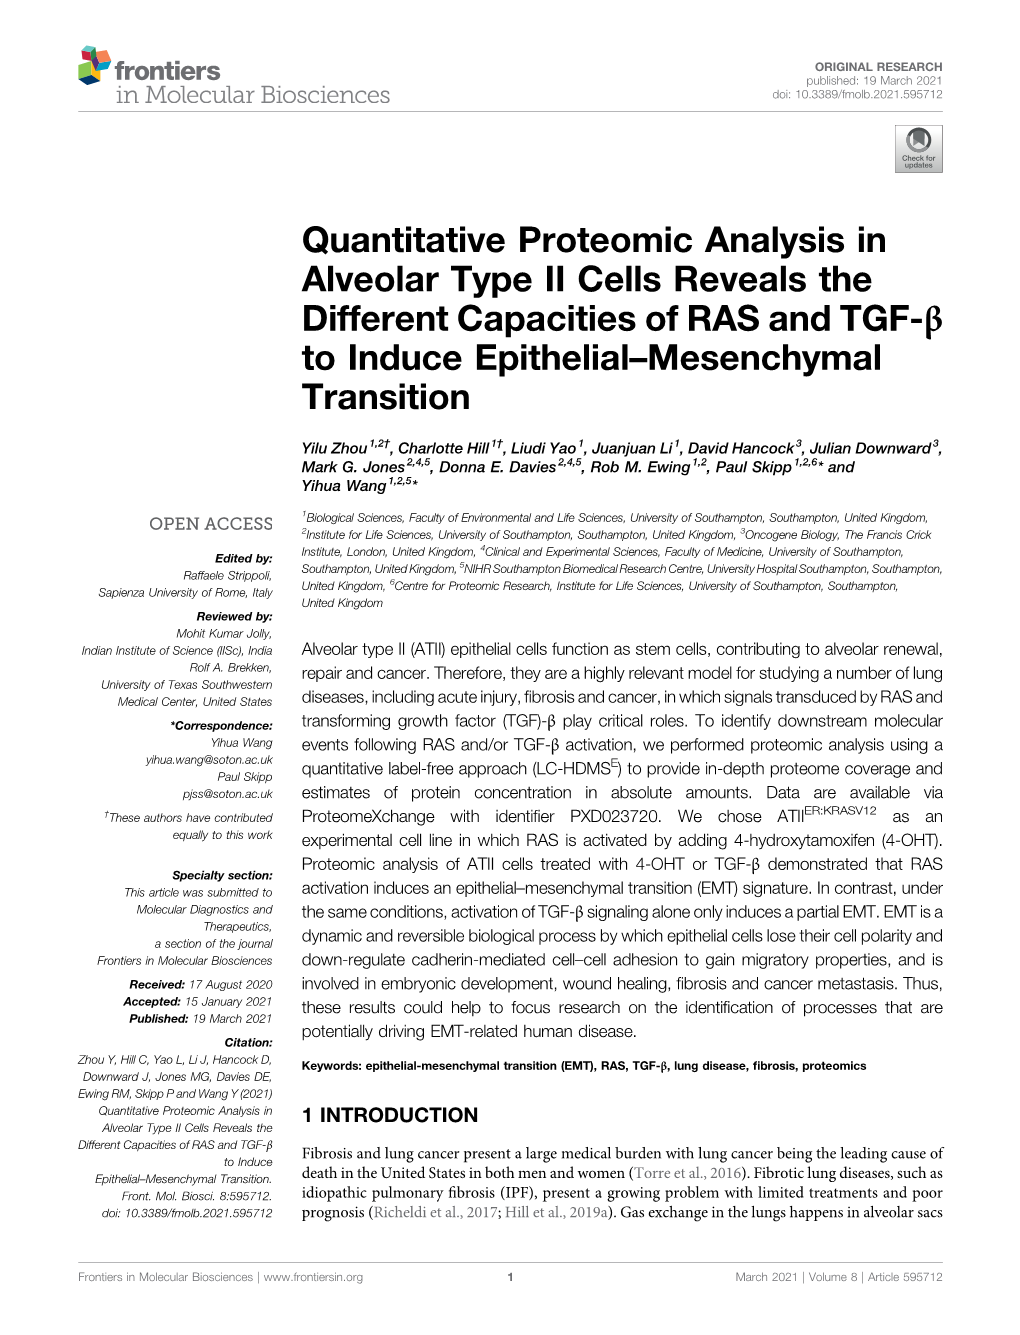 Quantitative Proteomic Analysis in Alveolar Type II Cells Reveals the Different Capacities of RAS and TGF-Β to Induce Epithelial–Mesenchymal Transition